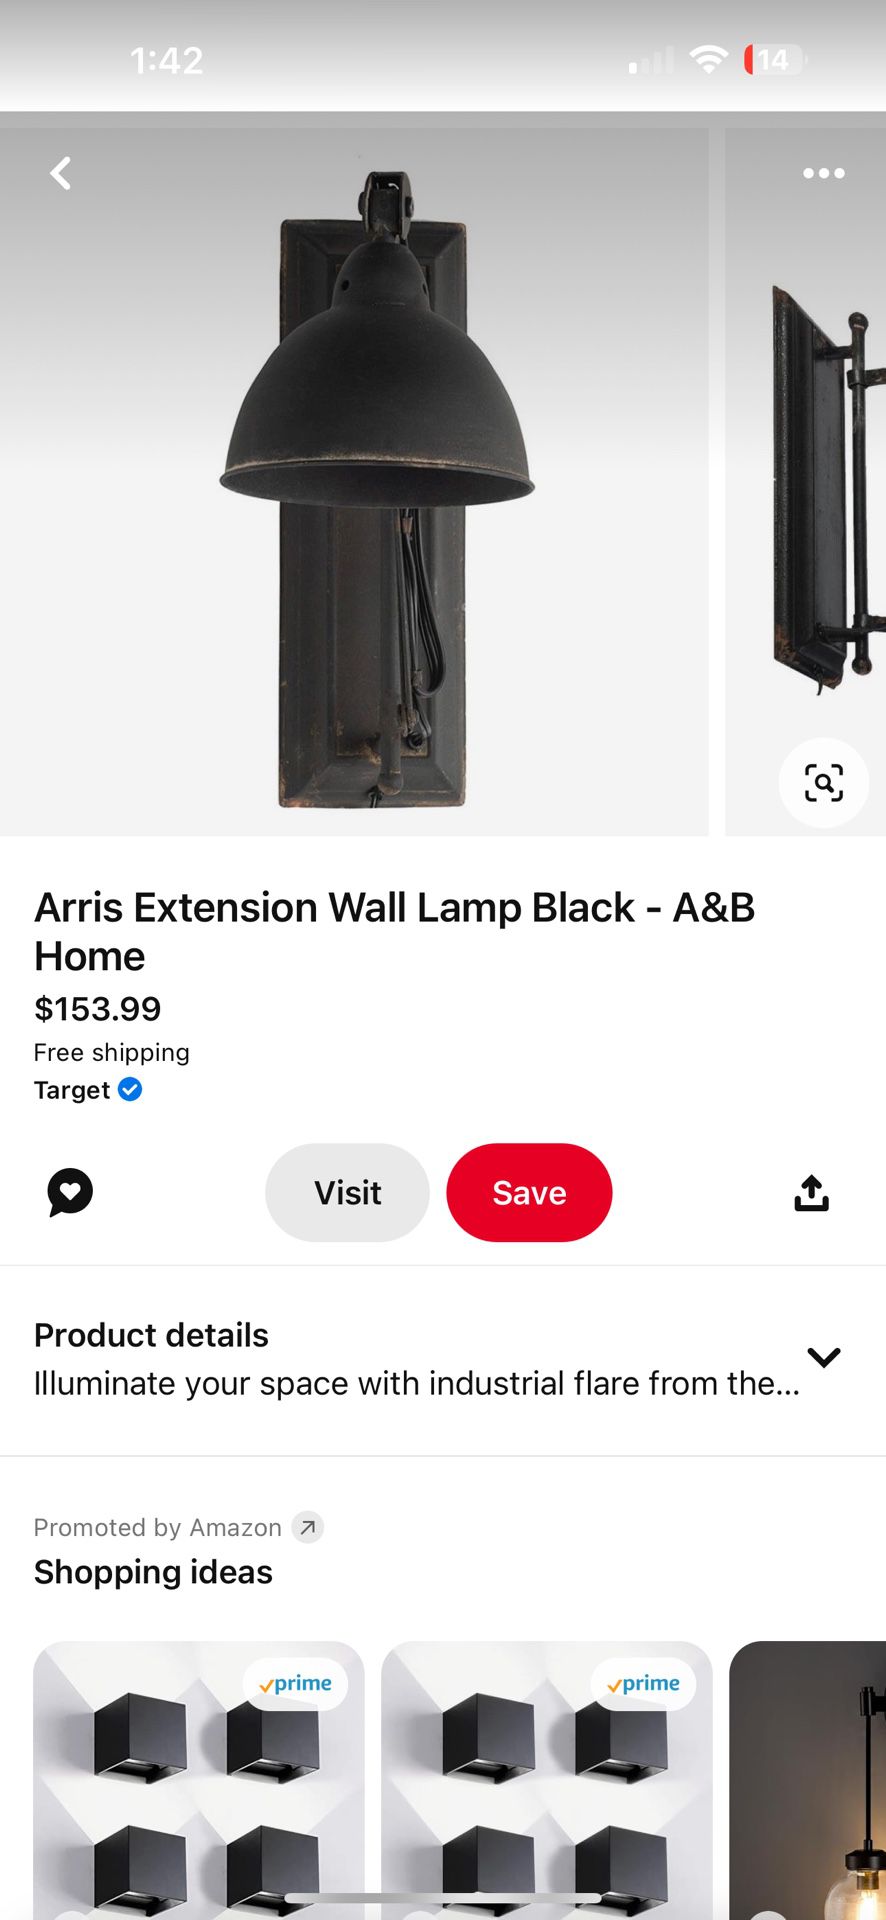 2 Arris Extension Wall Lamp Black - A&B Home